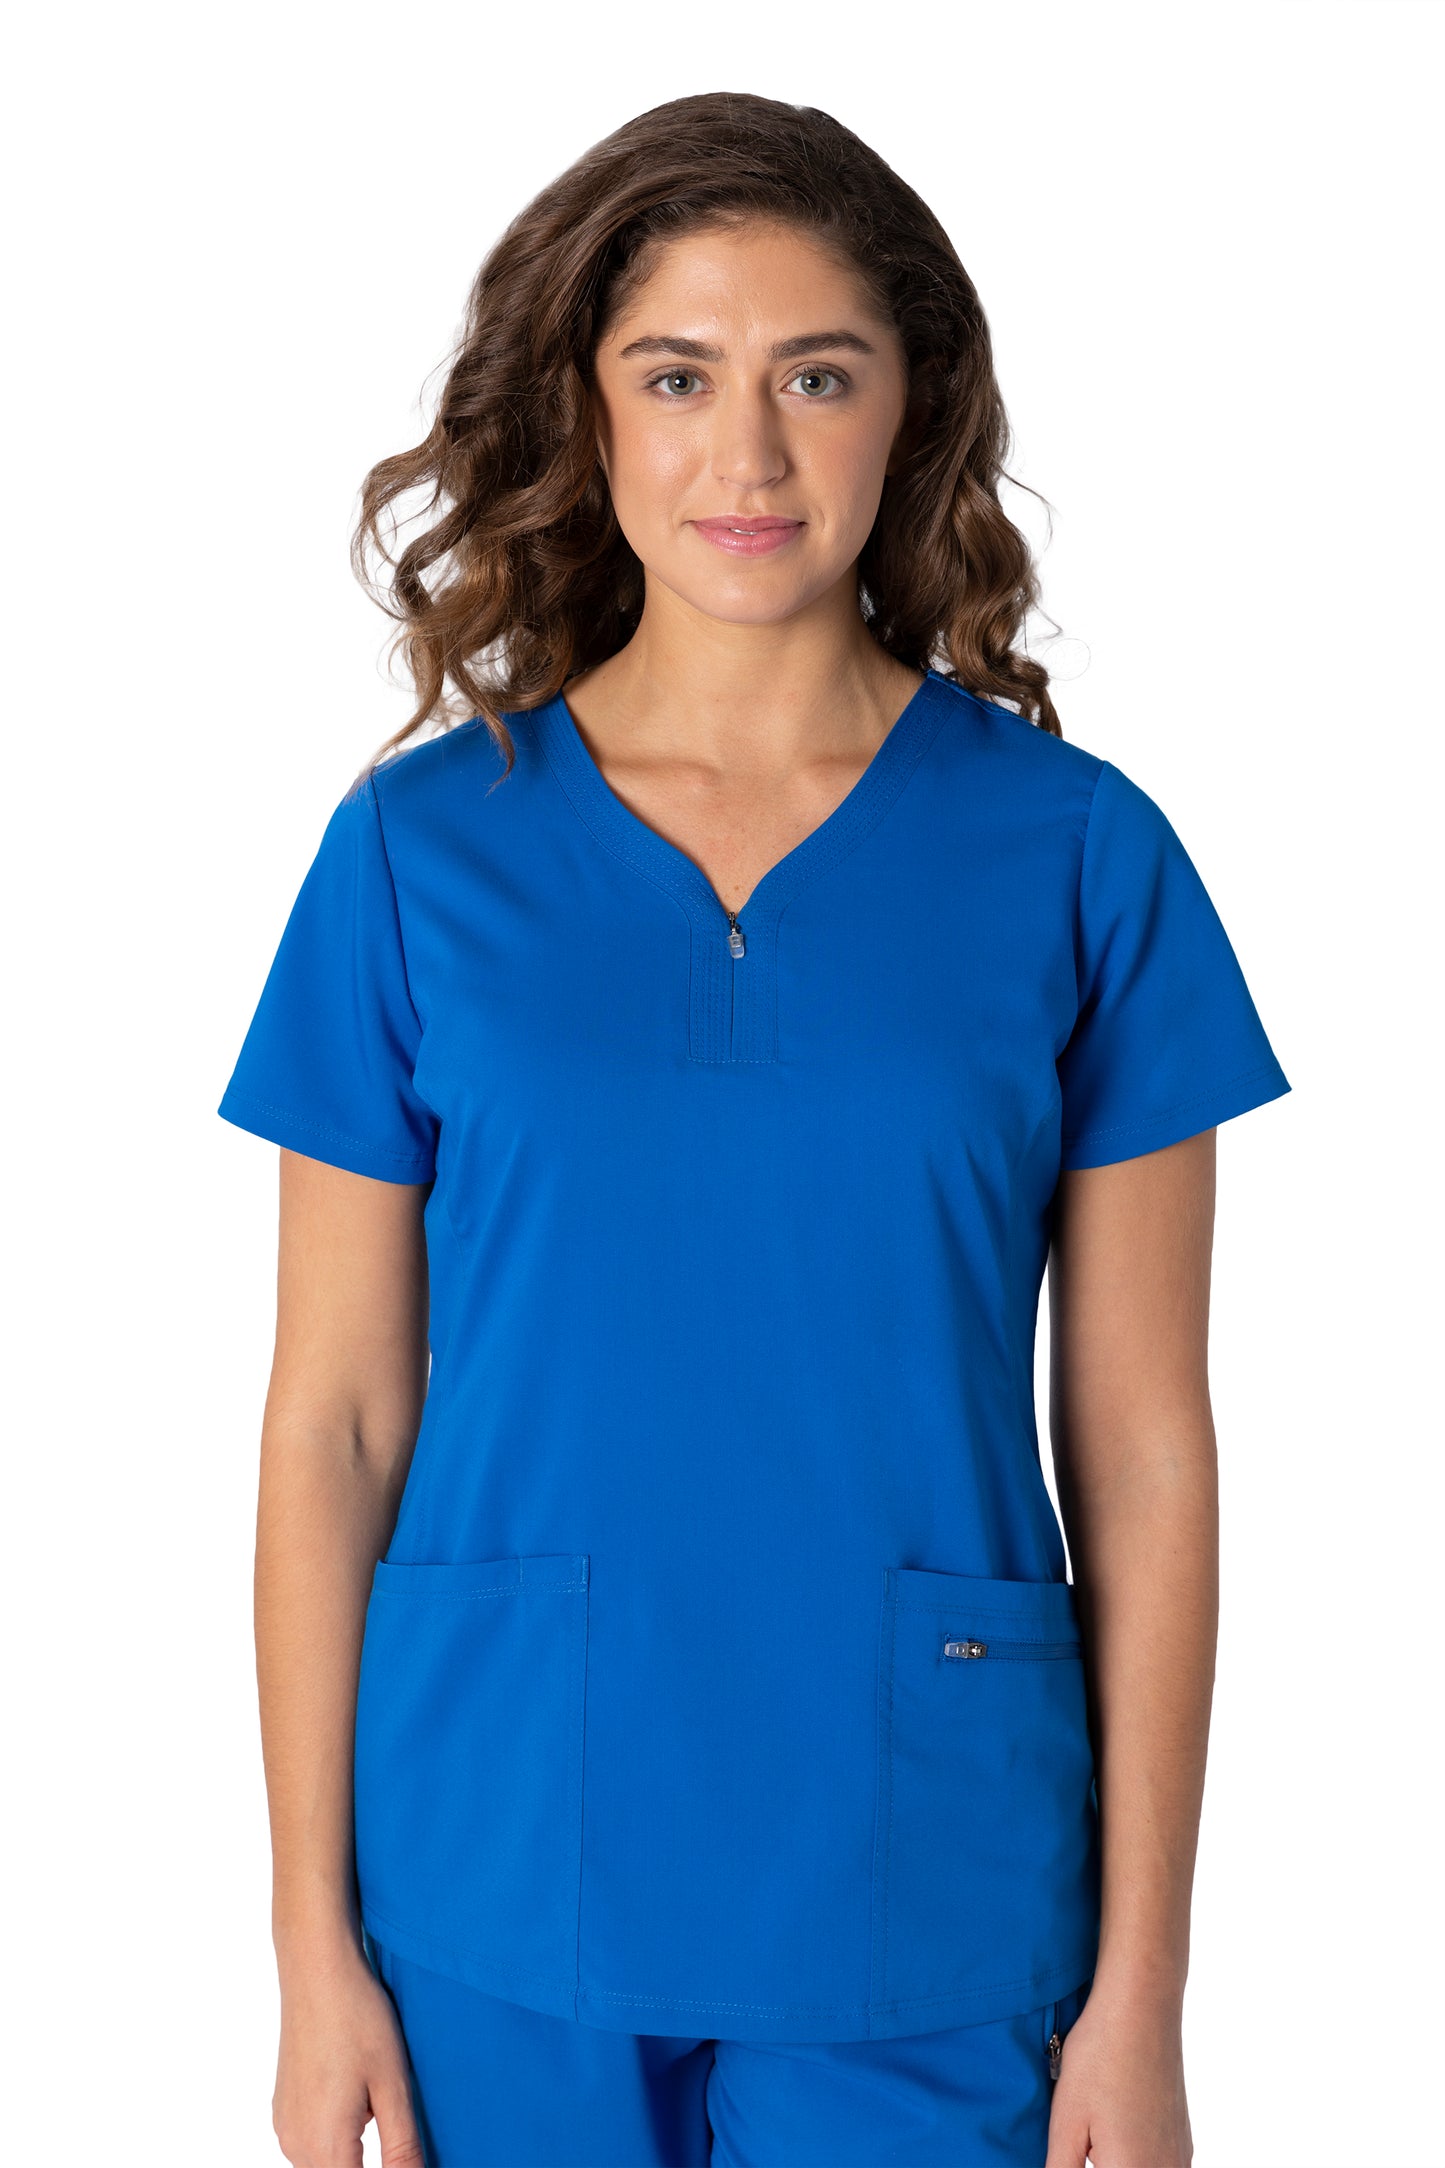 Healing Hands Purple Label Jeni Scrub Top in Royal at Parker's Clothing and Shoes.